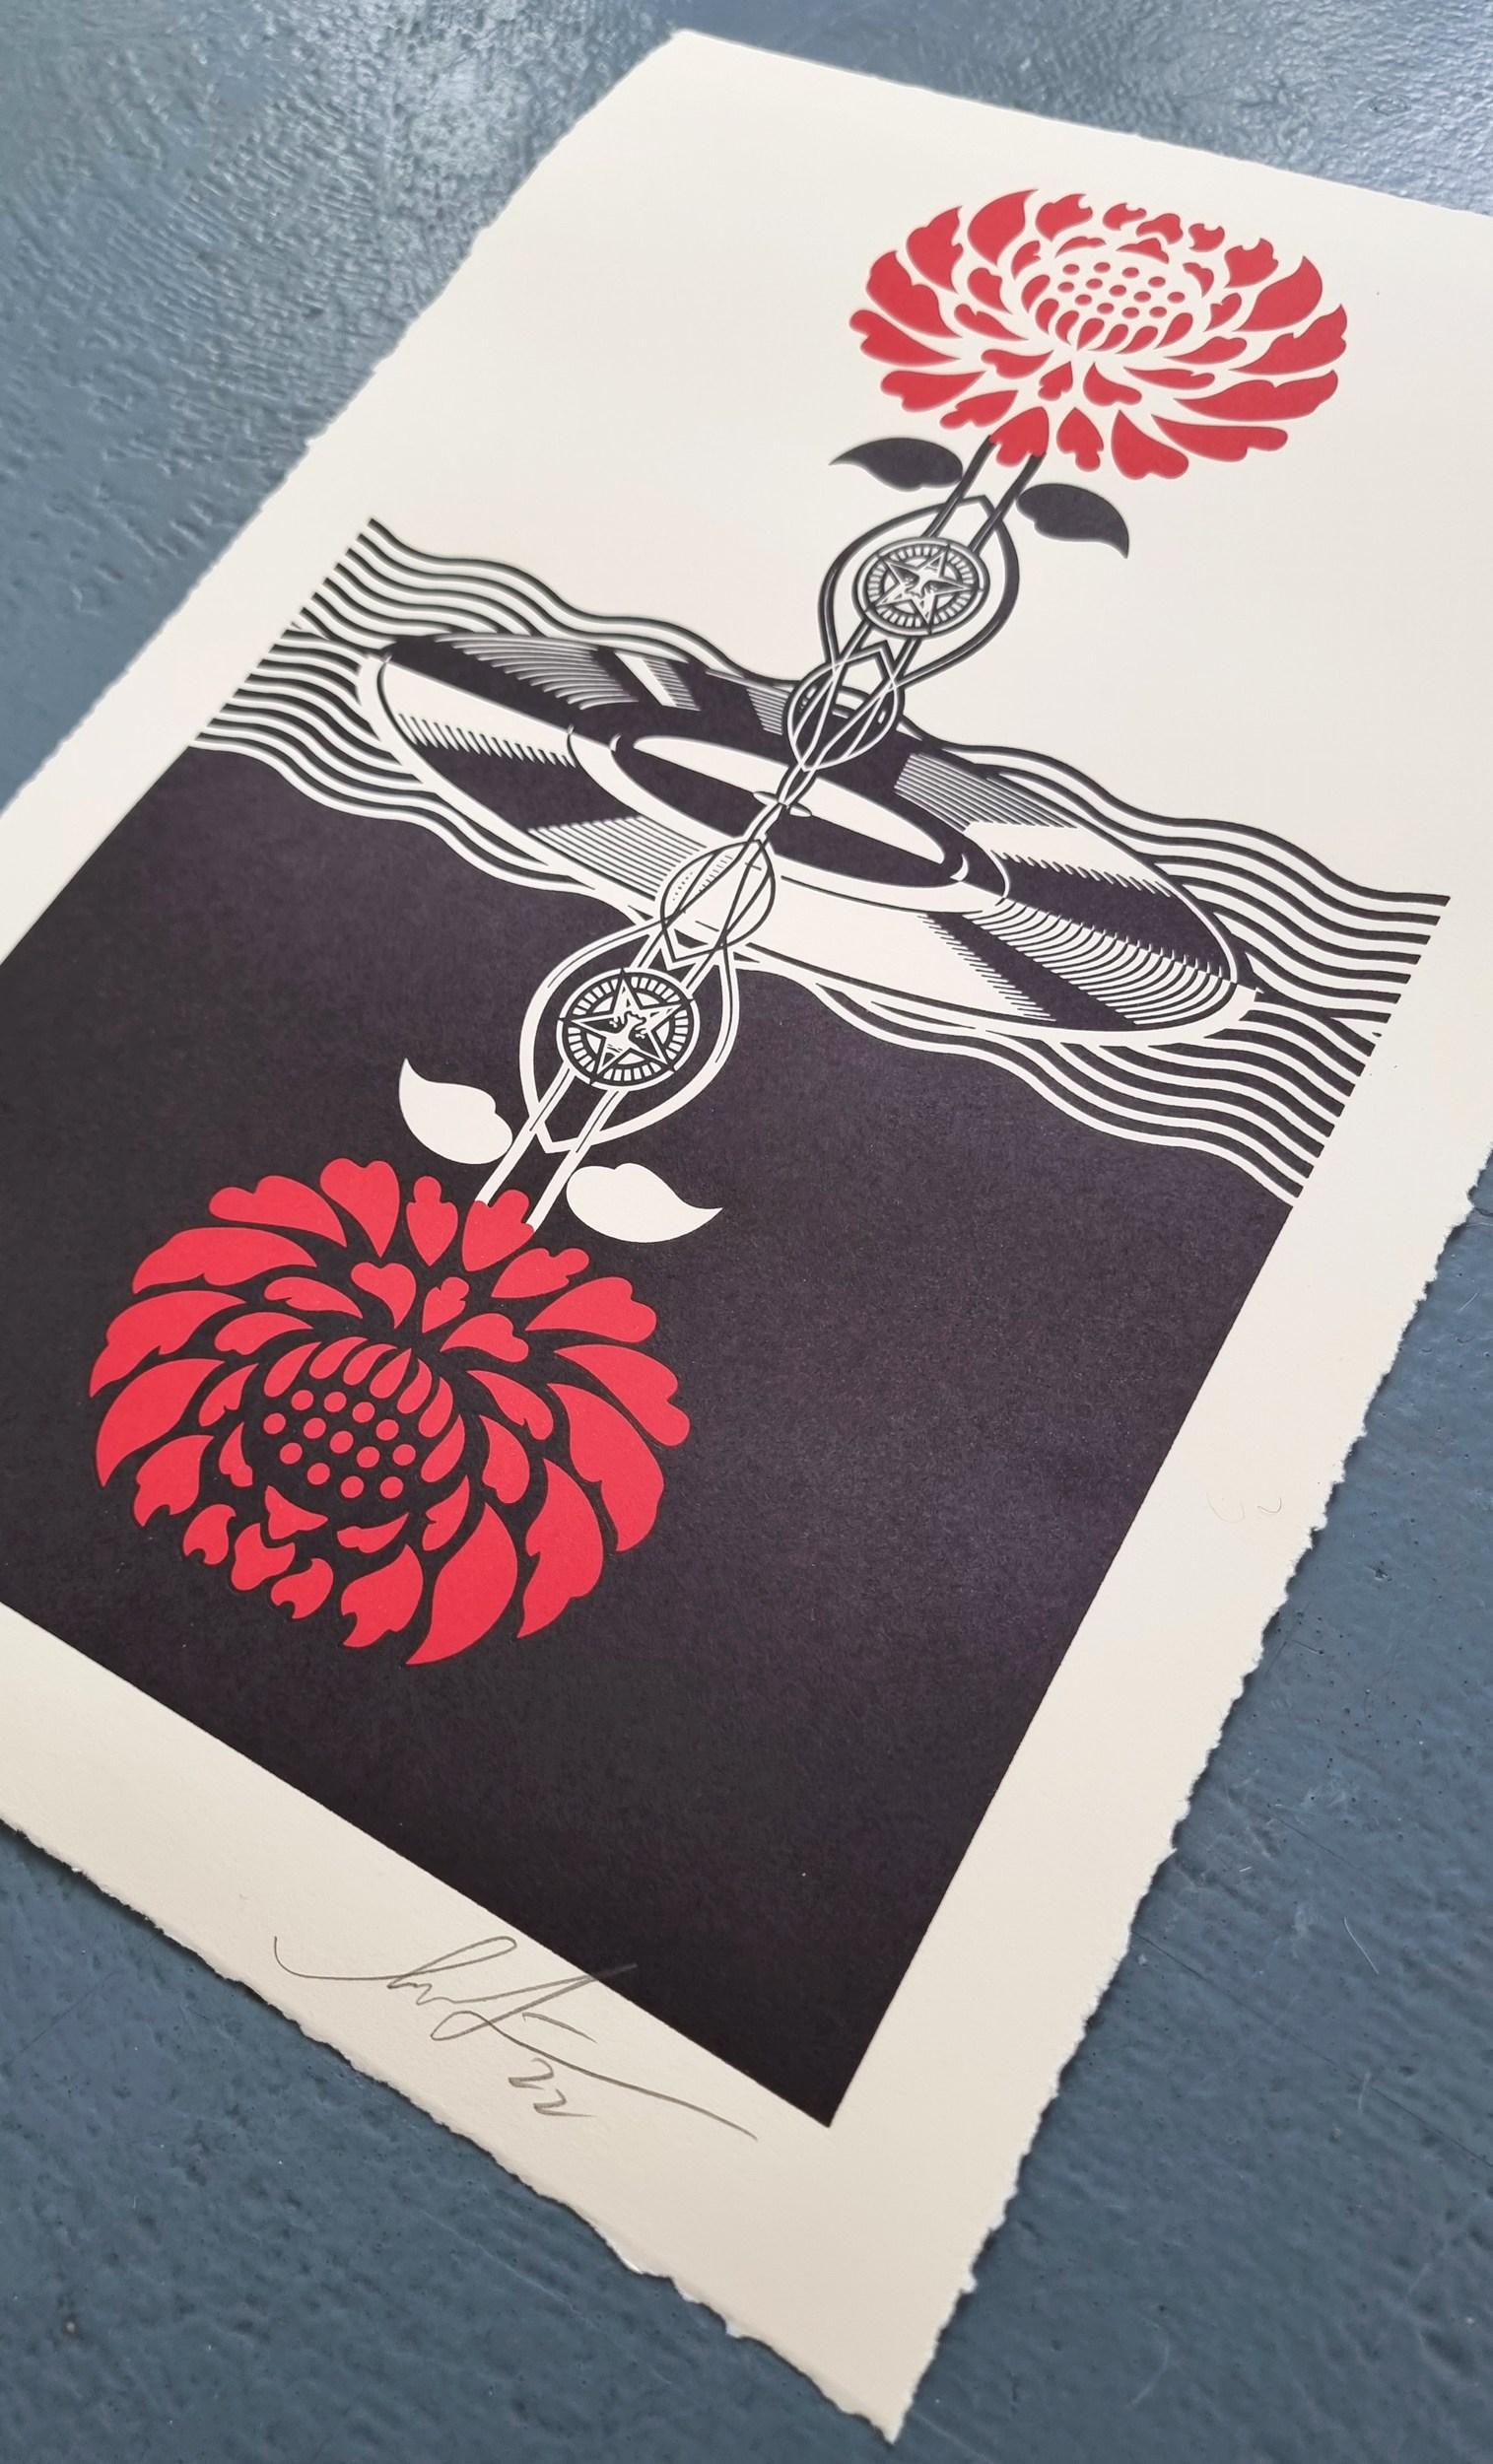 Post-Punk Flower (Red) (Iconic, Psychedelic Surrealism, MC Escher, Minimalism) - Print by Shepard Fairey